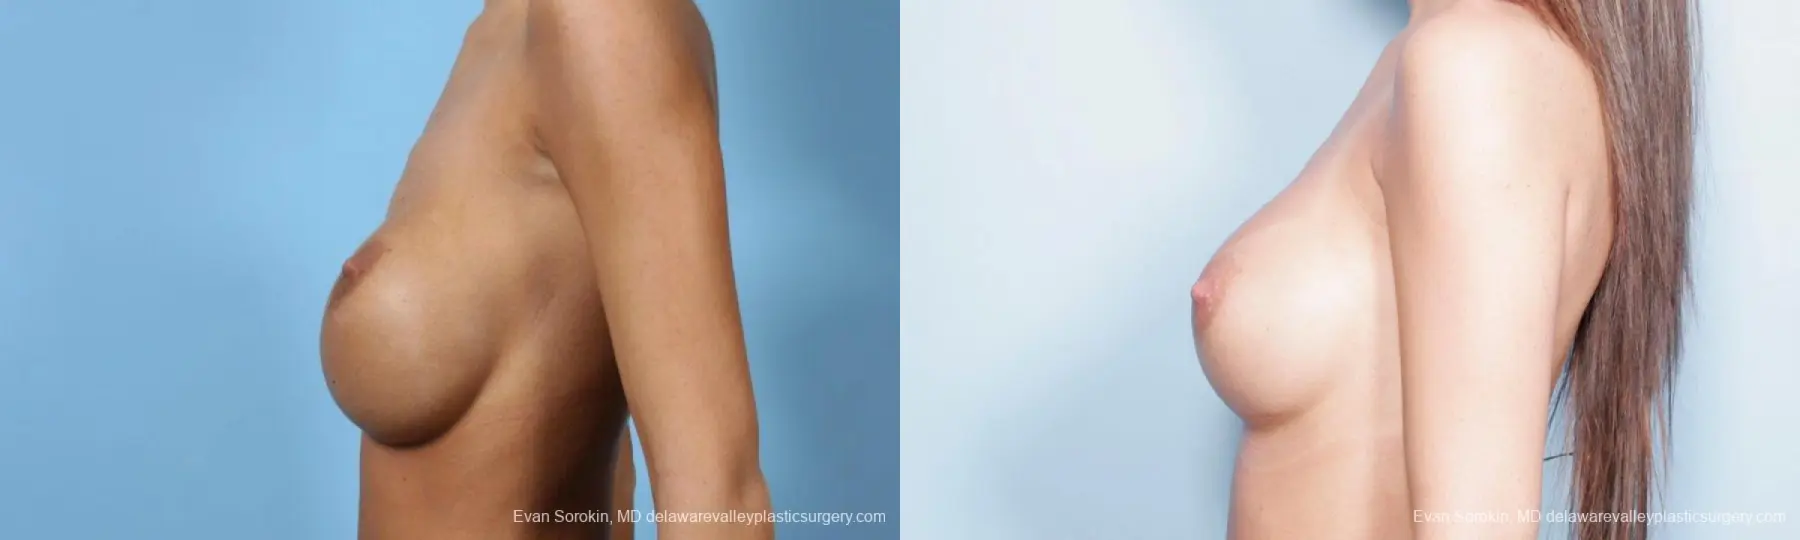 Philadelphia Breast Augmentation 9445 - Before and After 3